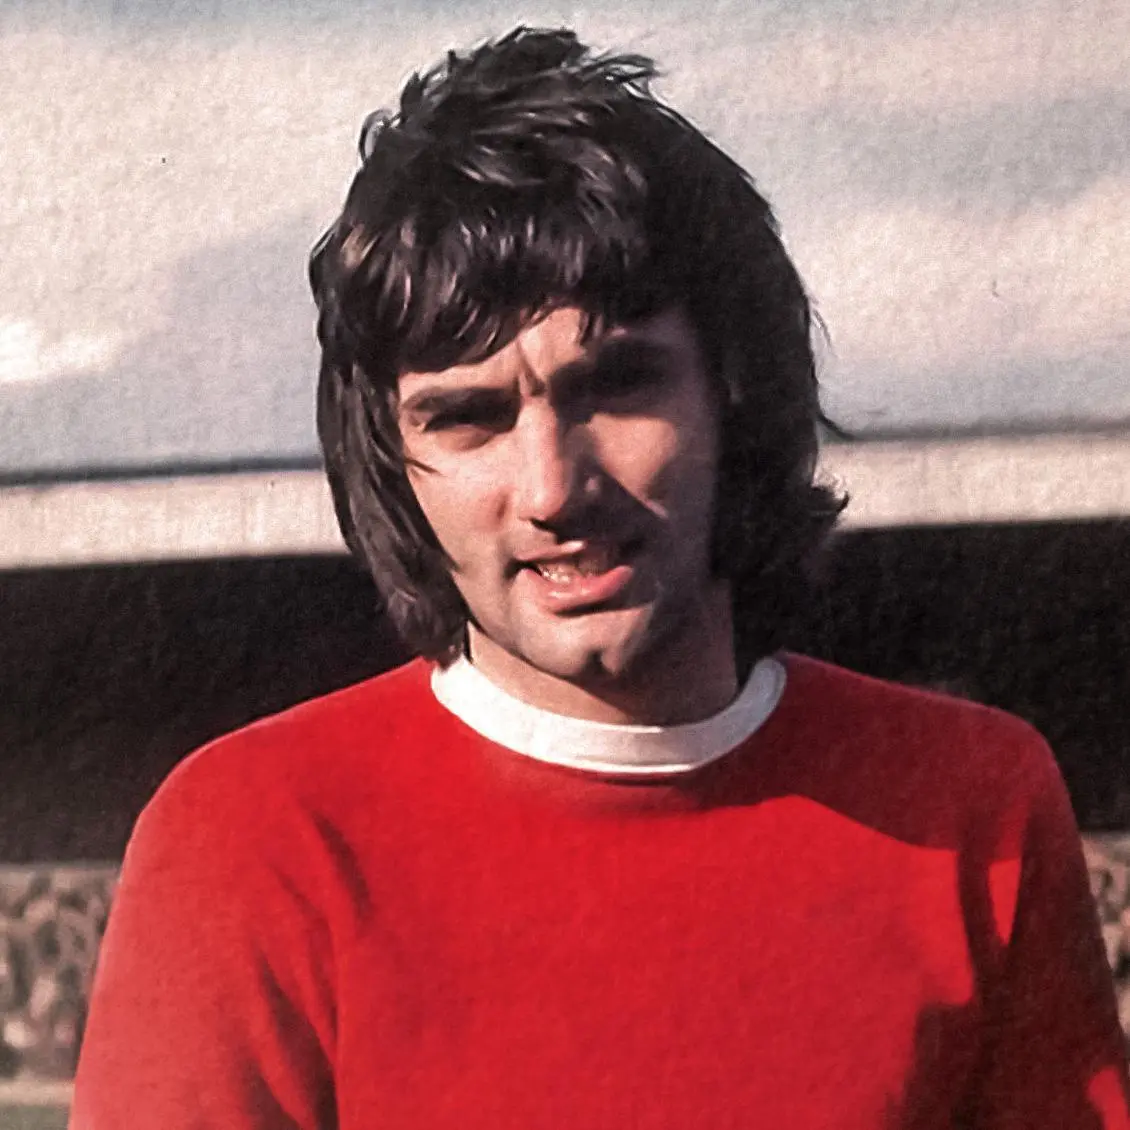 george best was runner up in best english player of the century poll